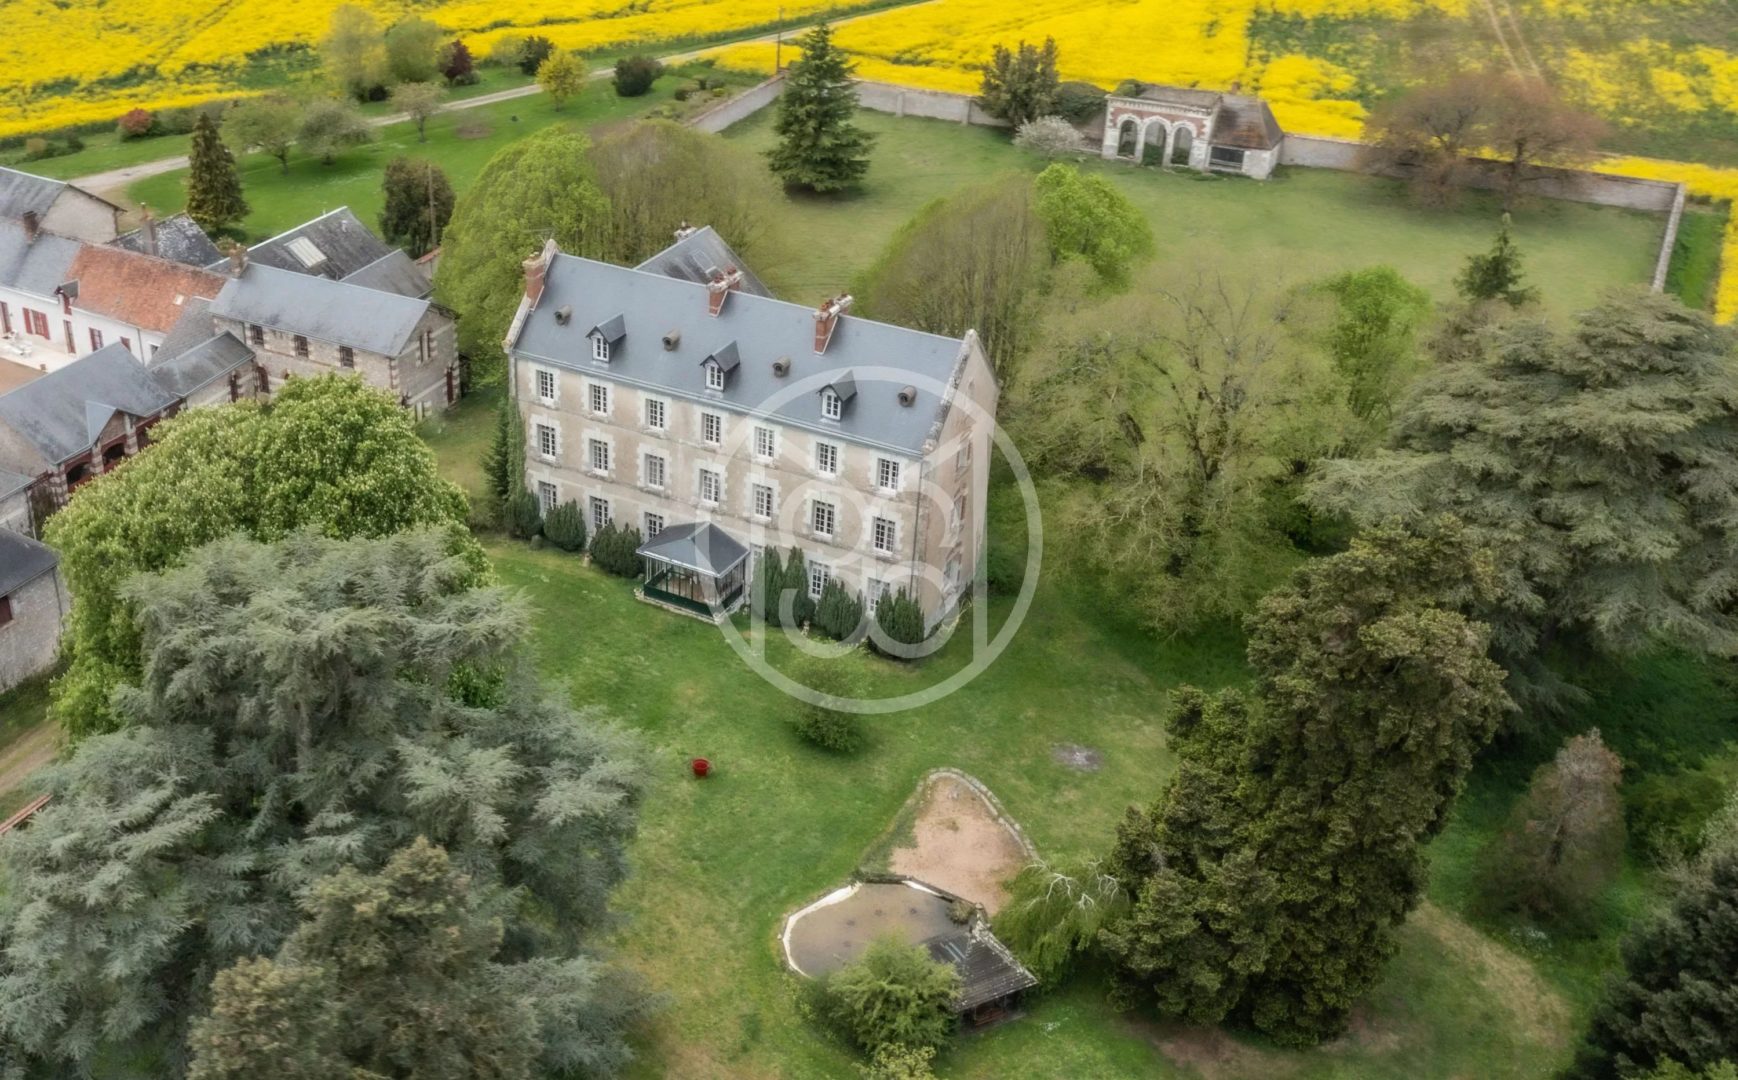 15KM FROM BLOIS – CHATEAU 18-19TH – 750 M² – PARK 3.5 HA - 20392CL